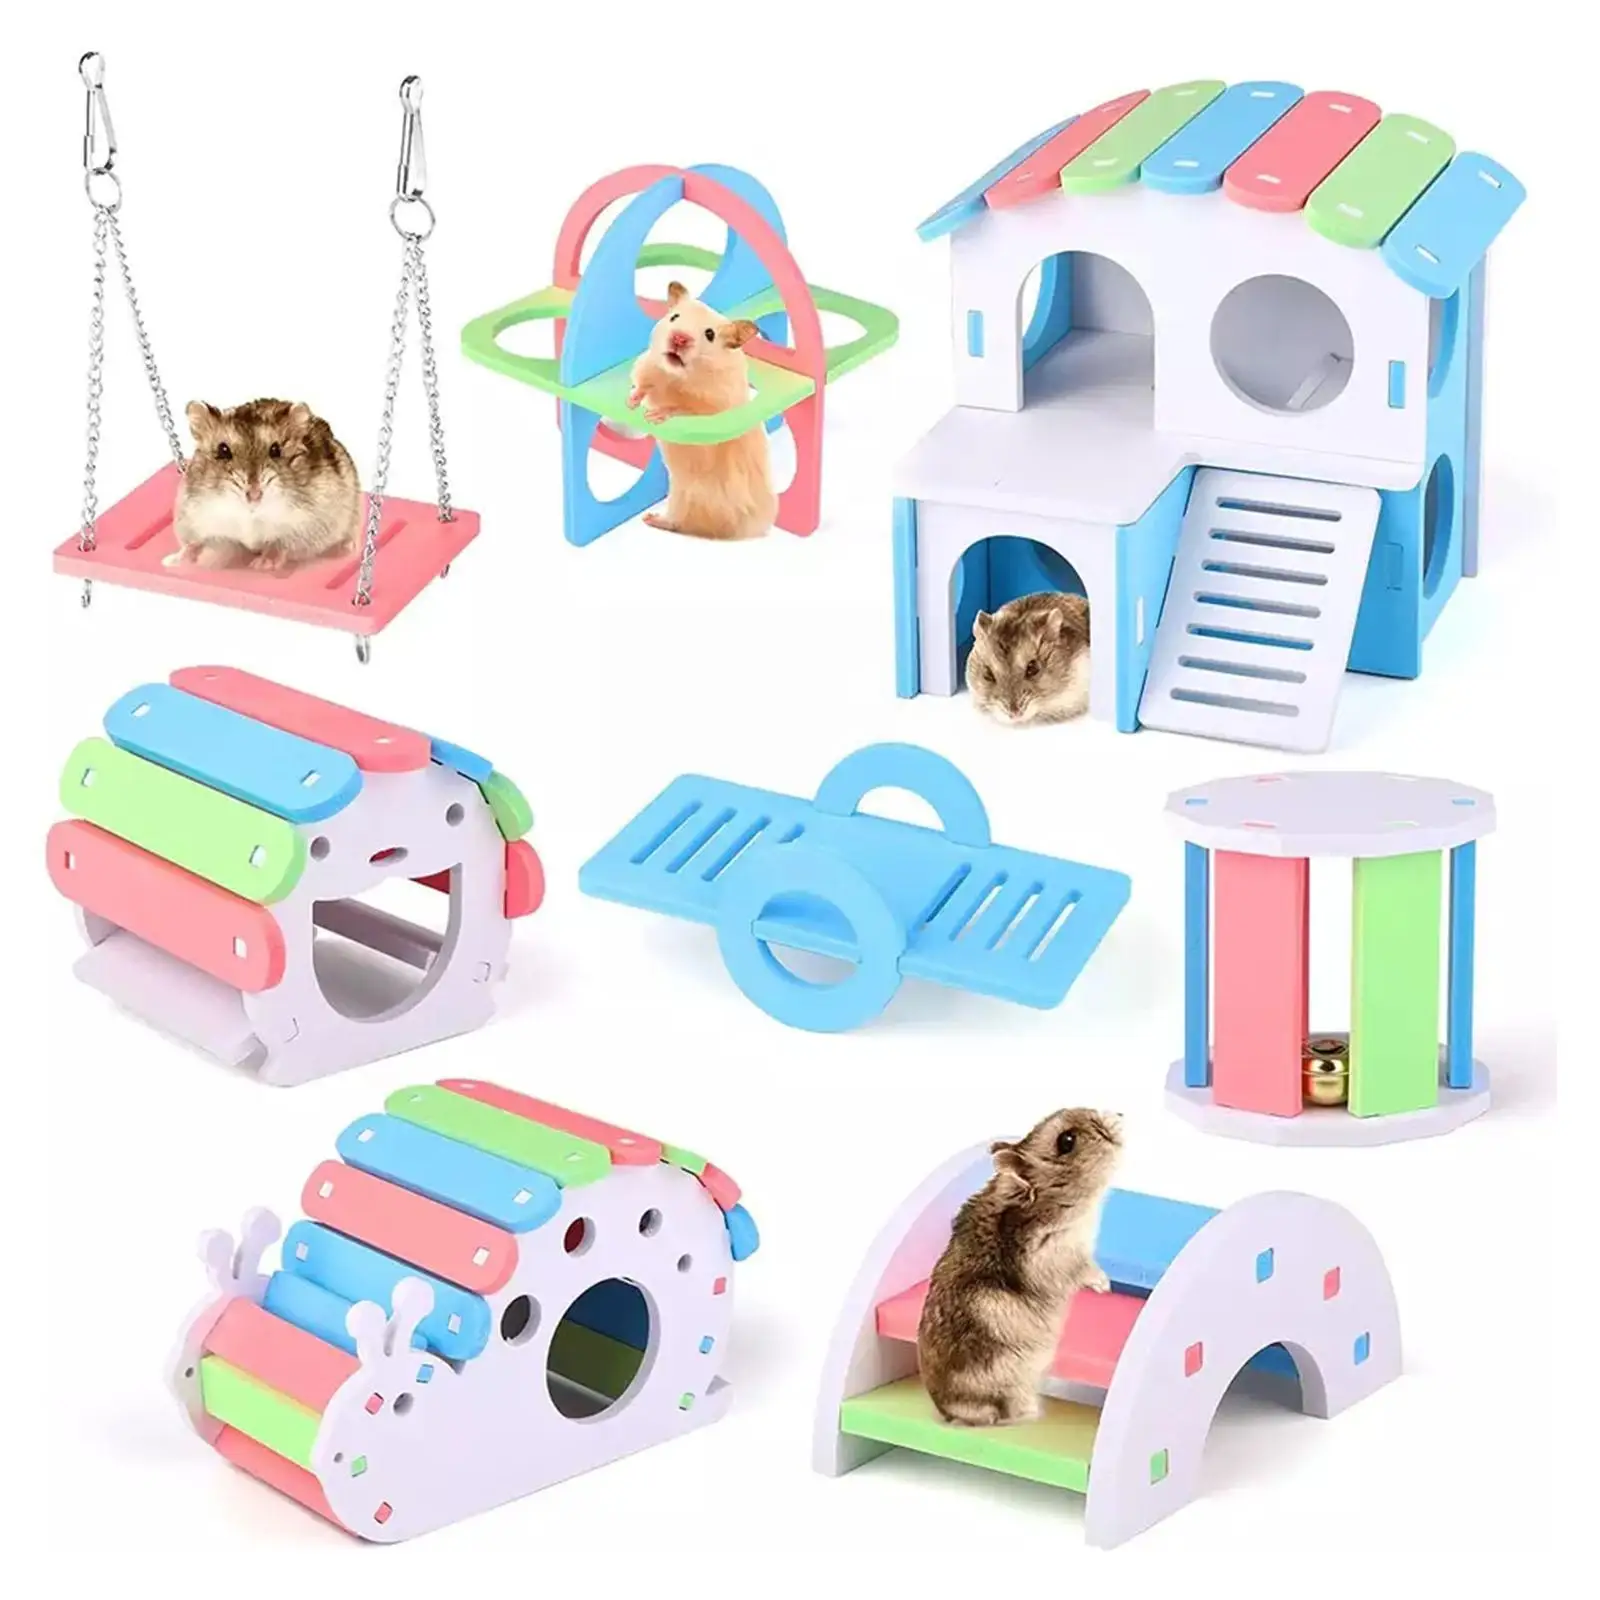 

Cute Hamster Exercise Toys Wooden Rainbow Bridge Seesaw Toy Activity Cage Animal DIY Accessories Toys Climb Small Swing Ham F3S7